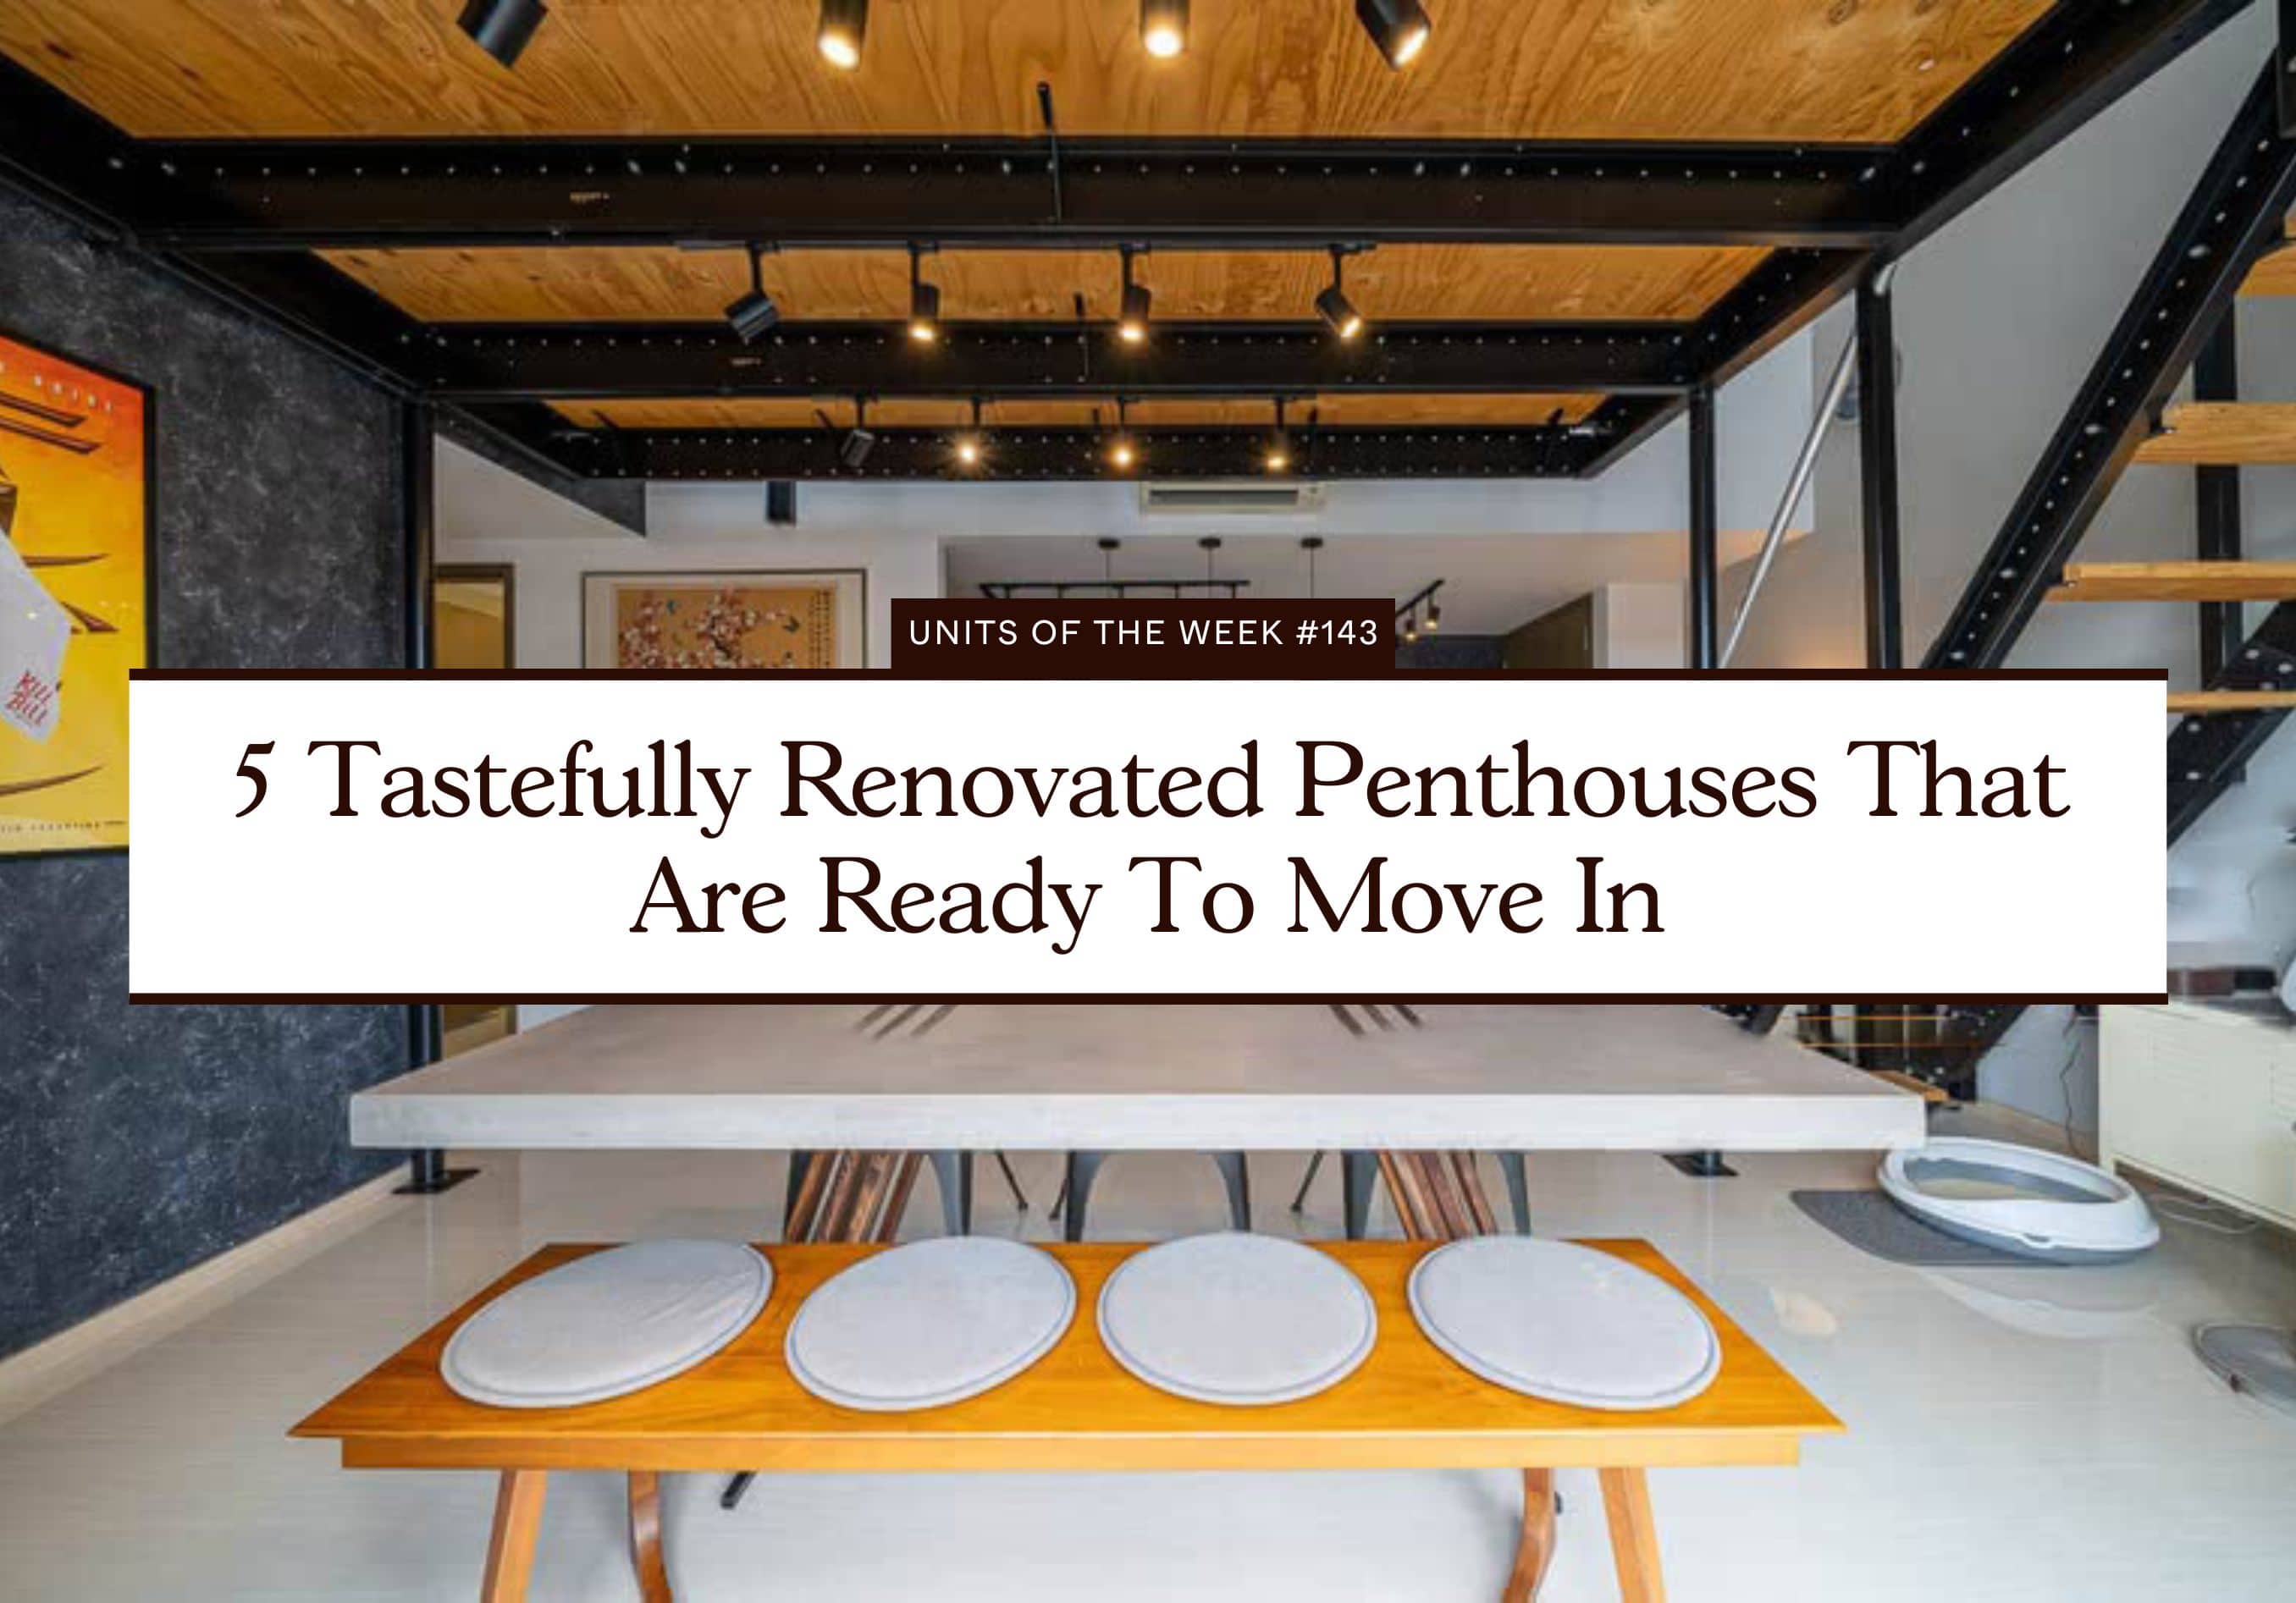 5 Tastefully Renovated Penthouses That Are Ready To Move In